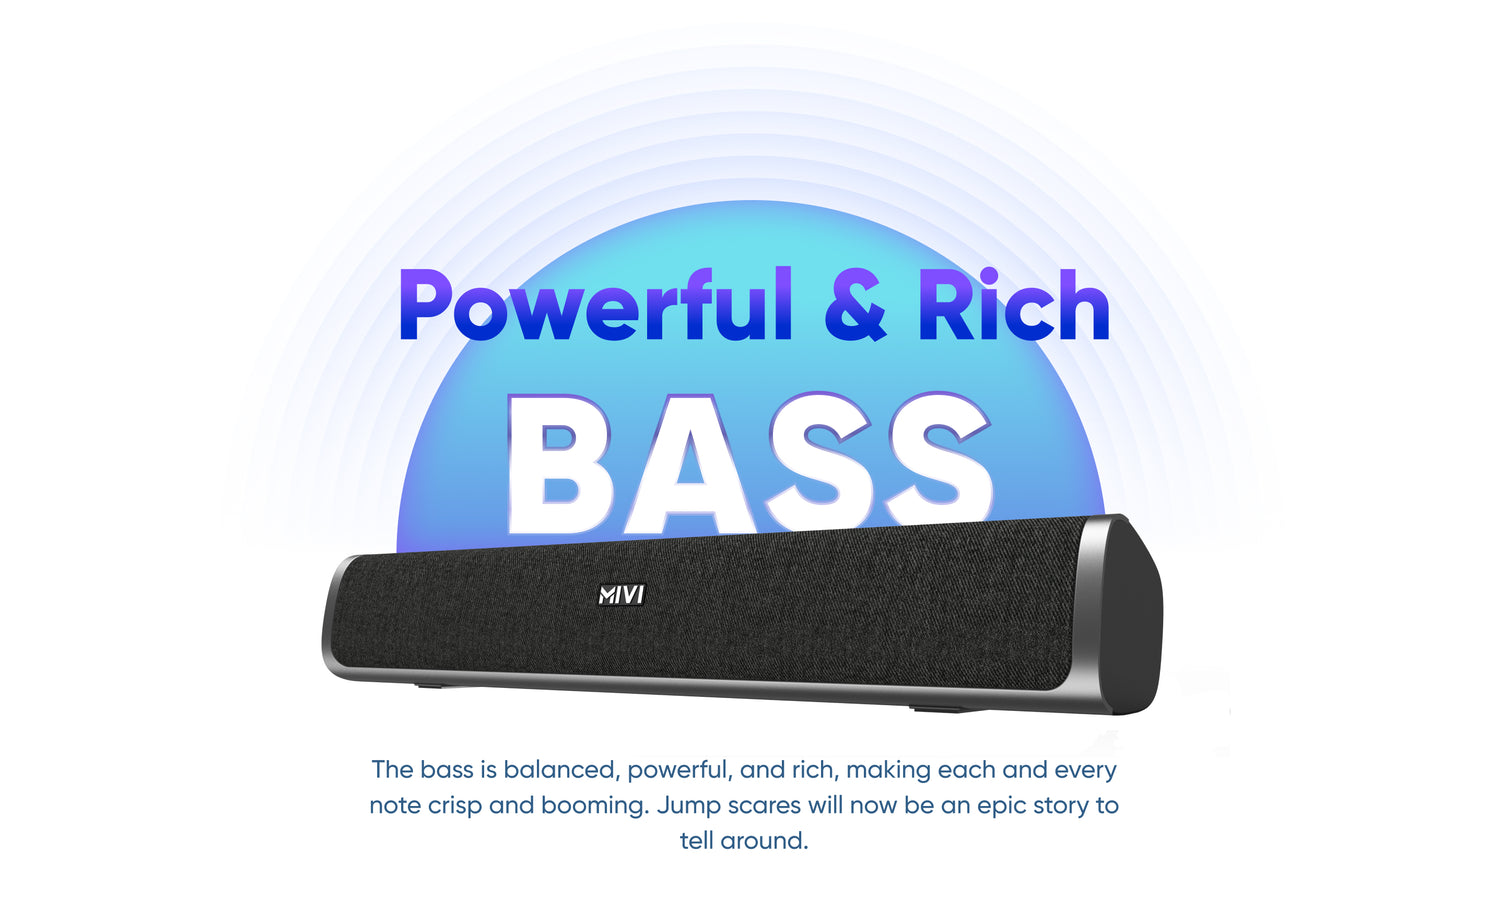 Powerful & Rich BASS - The bass is balanced, powerful, and rich, making each and every note crisp and booming. Jump scares will now be an epic story to tell around.